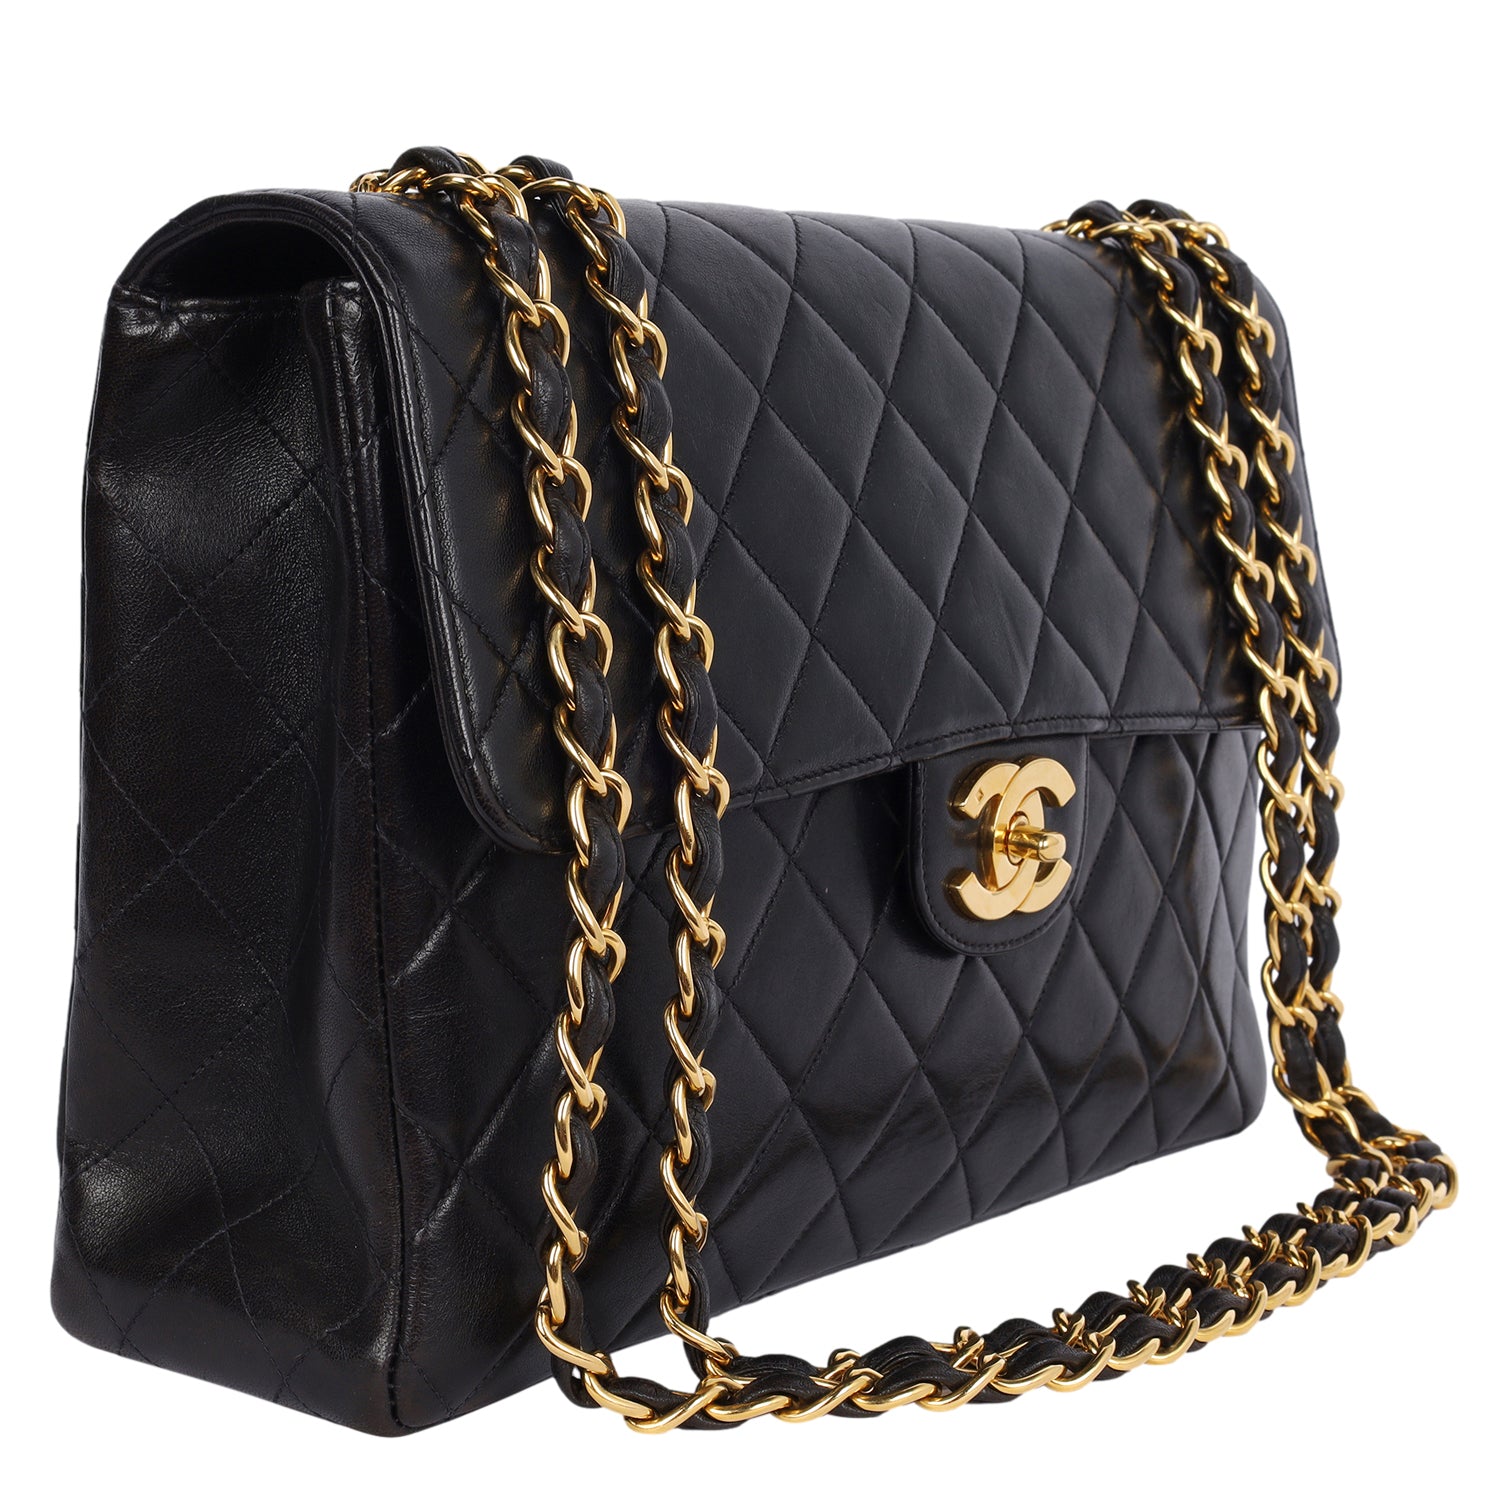 Chanel Classic Medium Double Flap, Black Caviar Leather, Silver Hardware,  Preowned in Dustbag